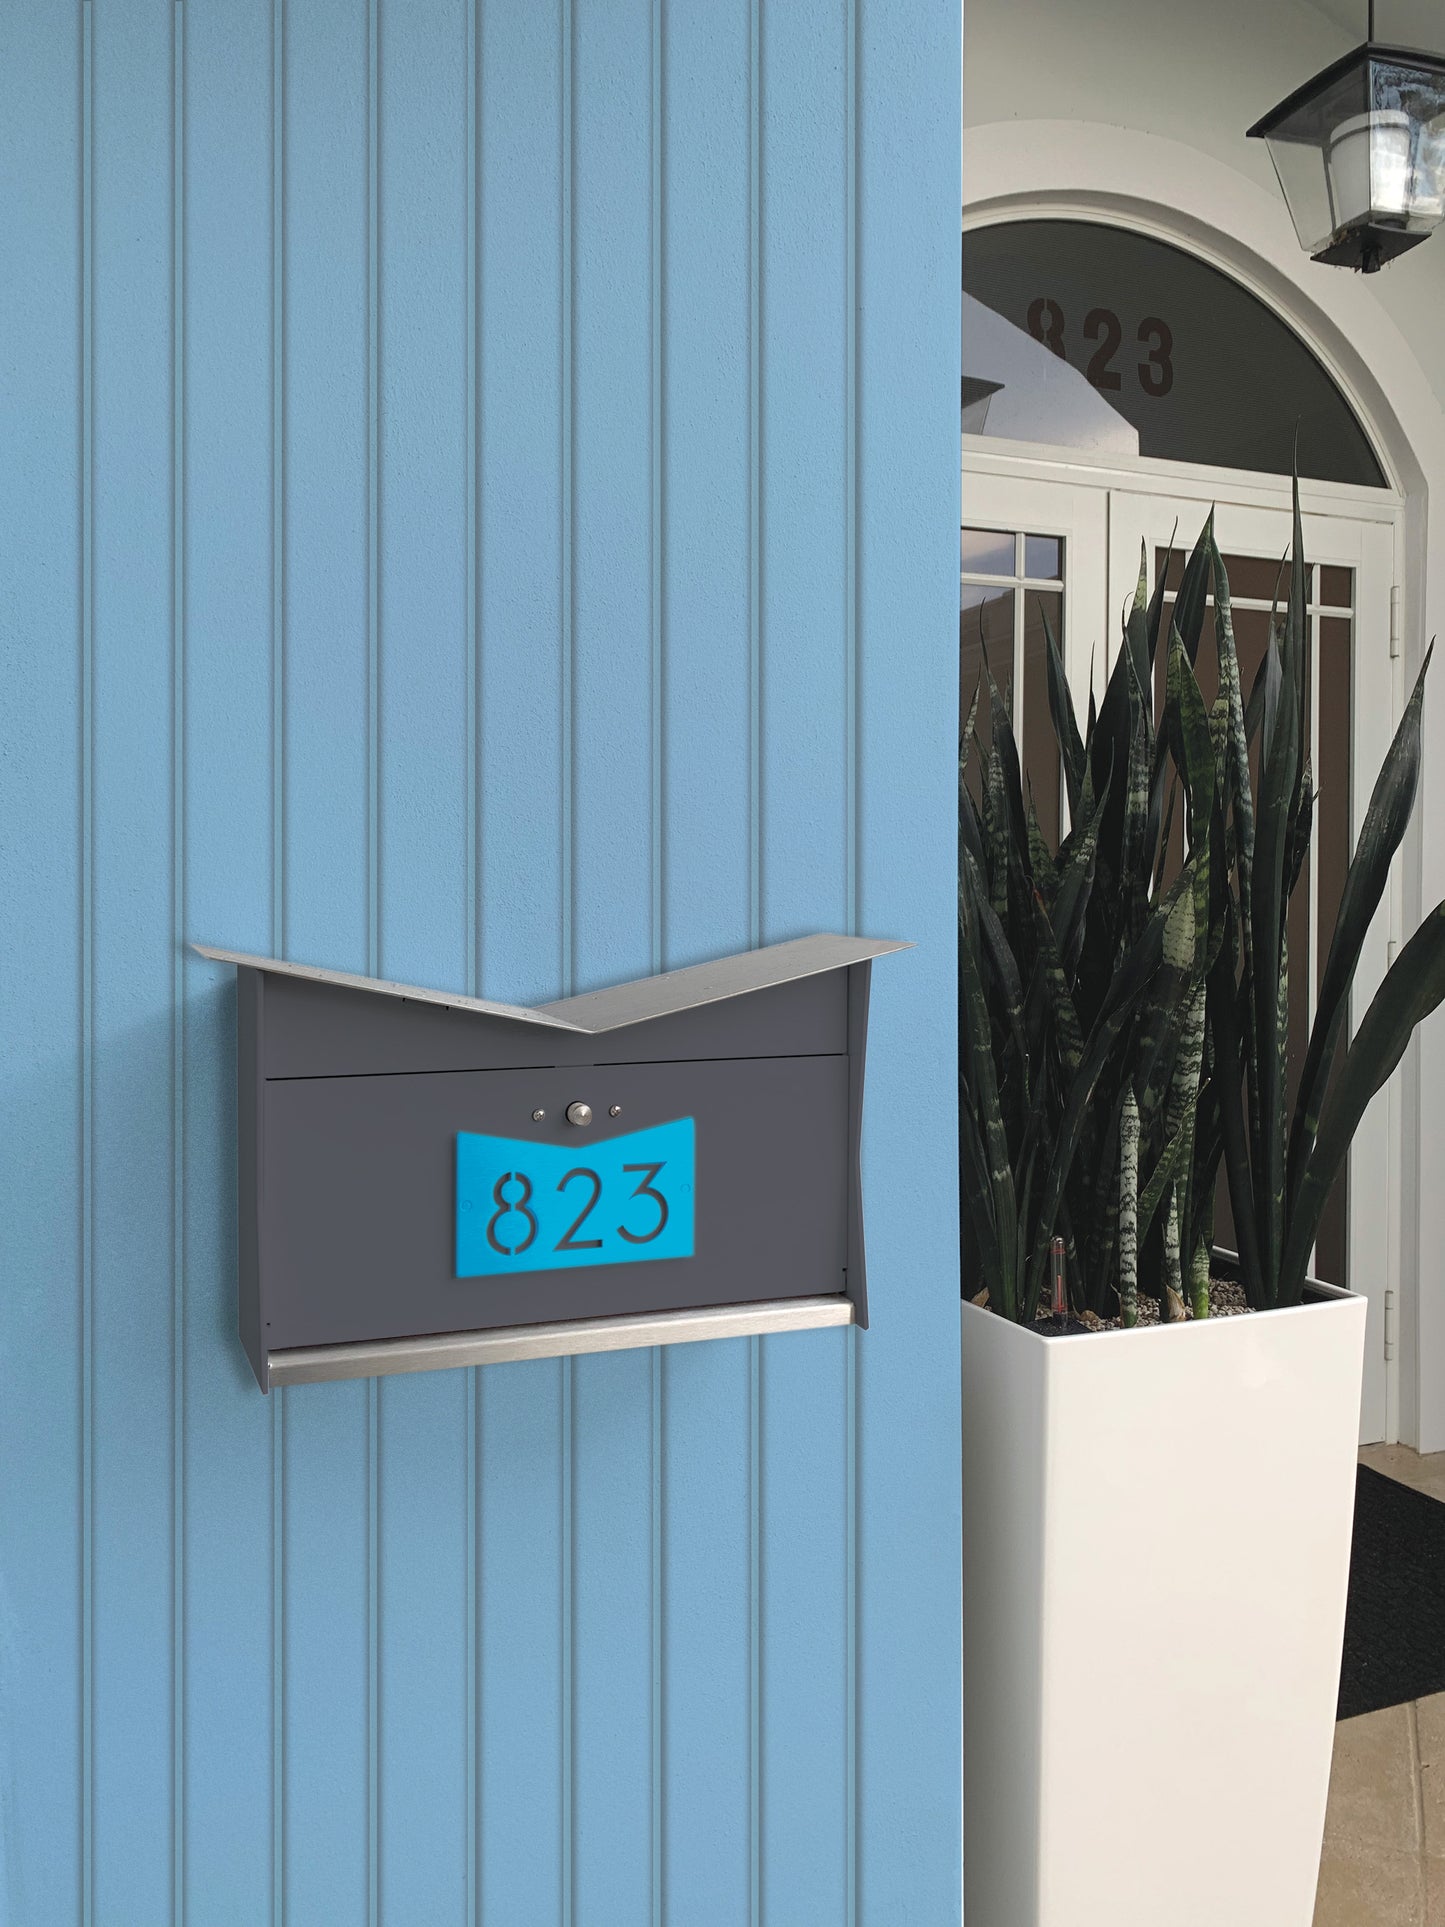 Wall Mount Mailbox mounted to outdoor wall. ButterFly Box in designer gray and aqua